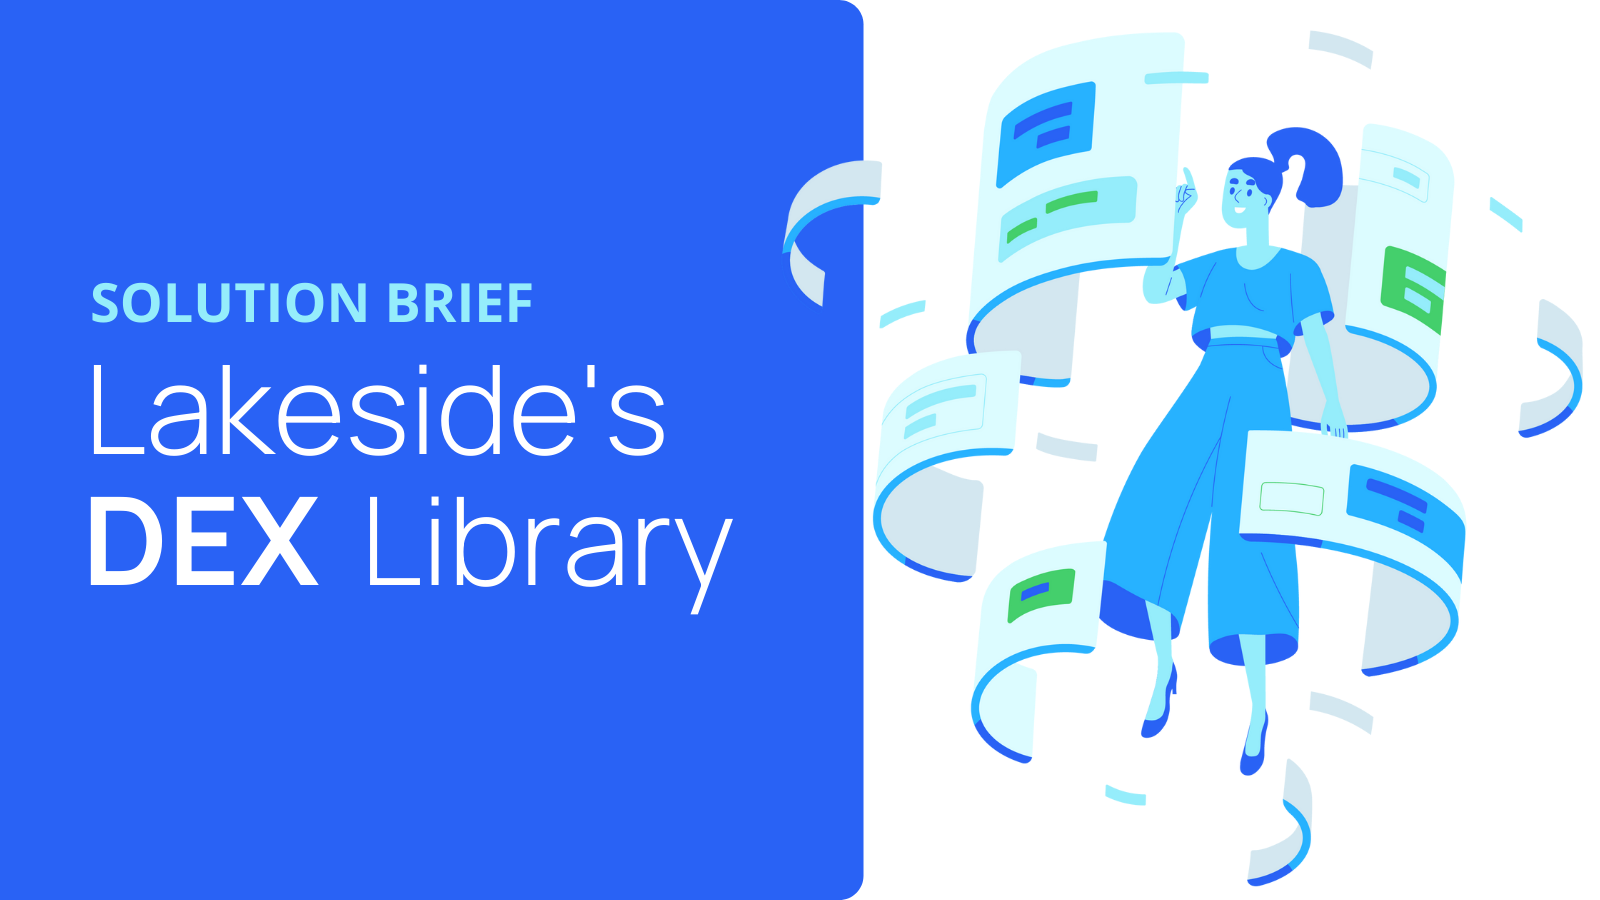 Illustration graphic for Lakeside's DEX Library solution brief.